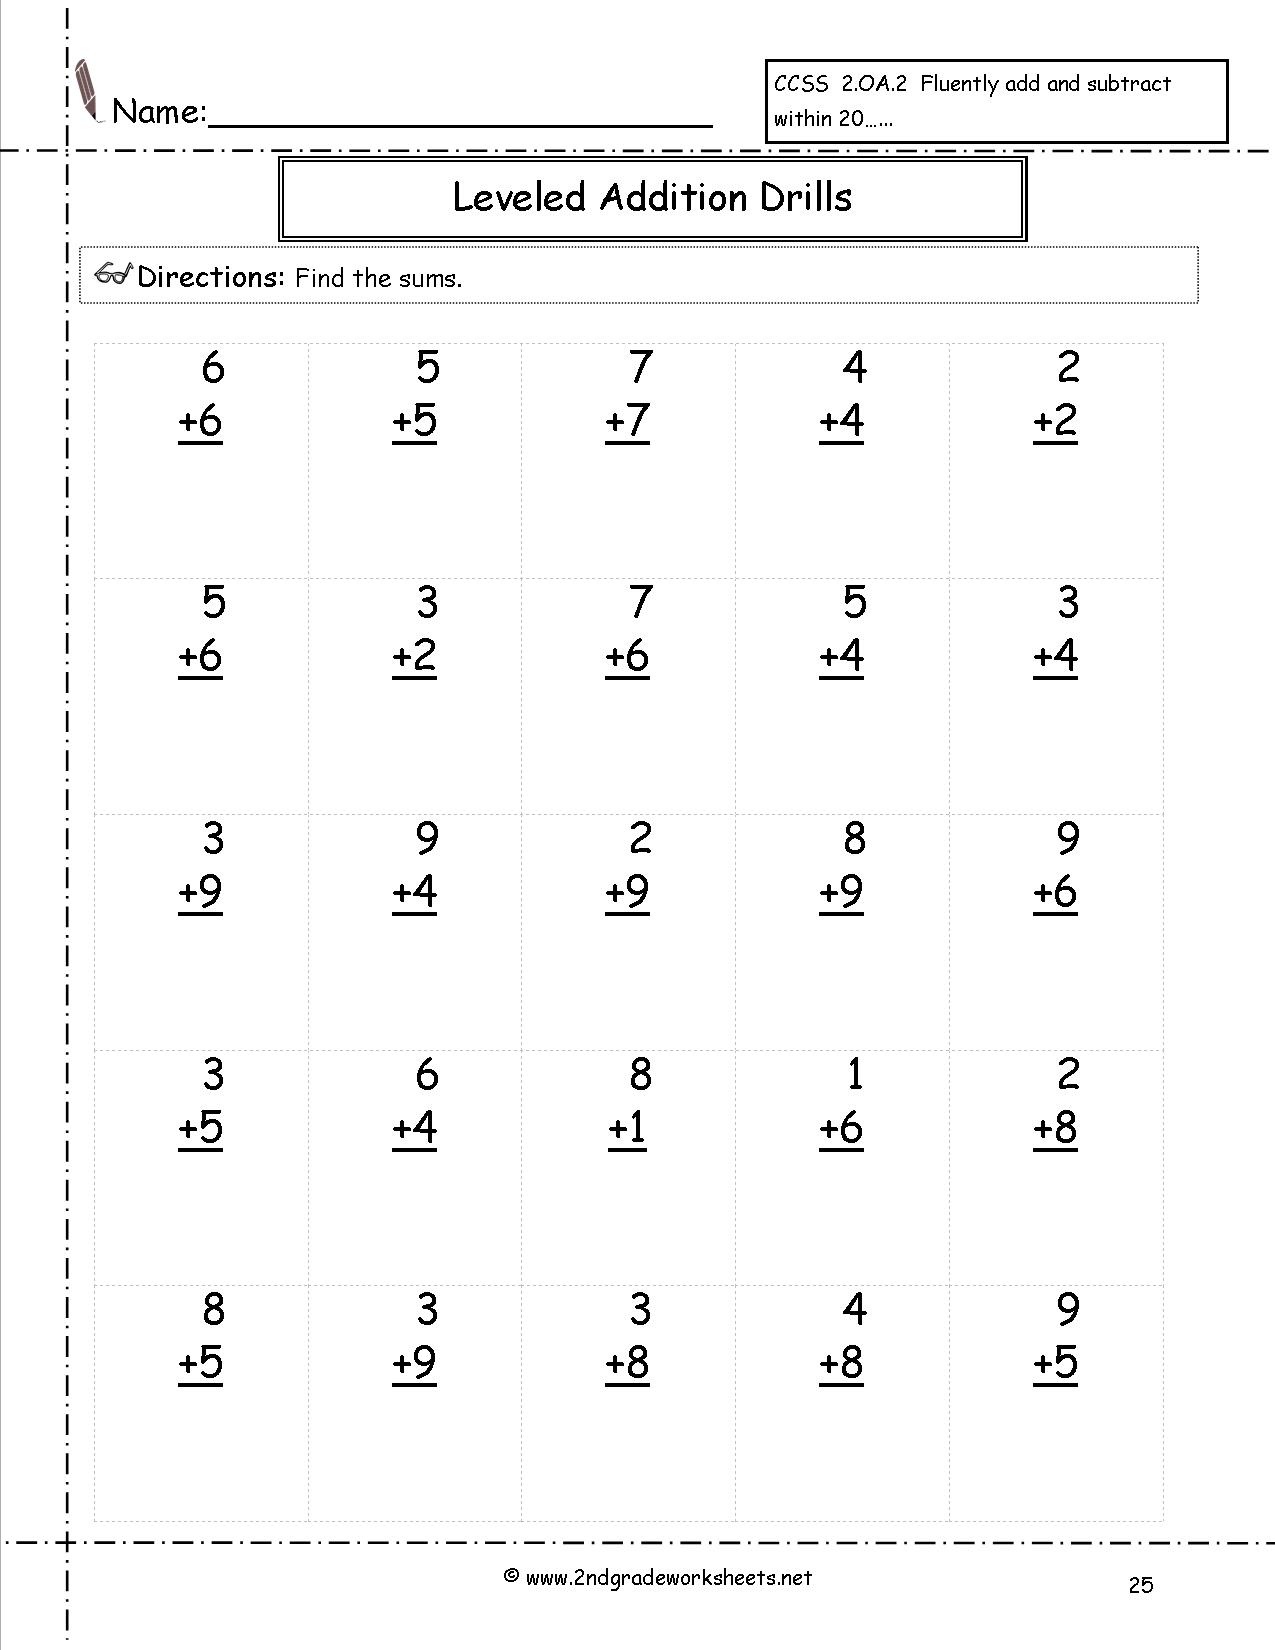 Free Math Worksheets And Printouts - Free Printable Addition And Subtraction Worksheets